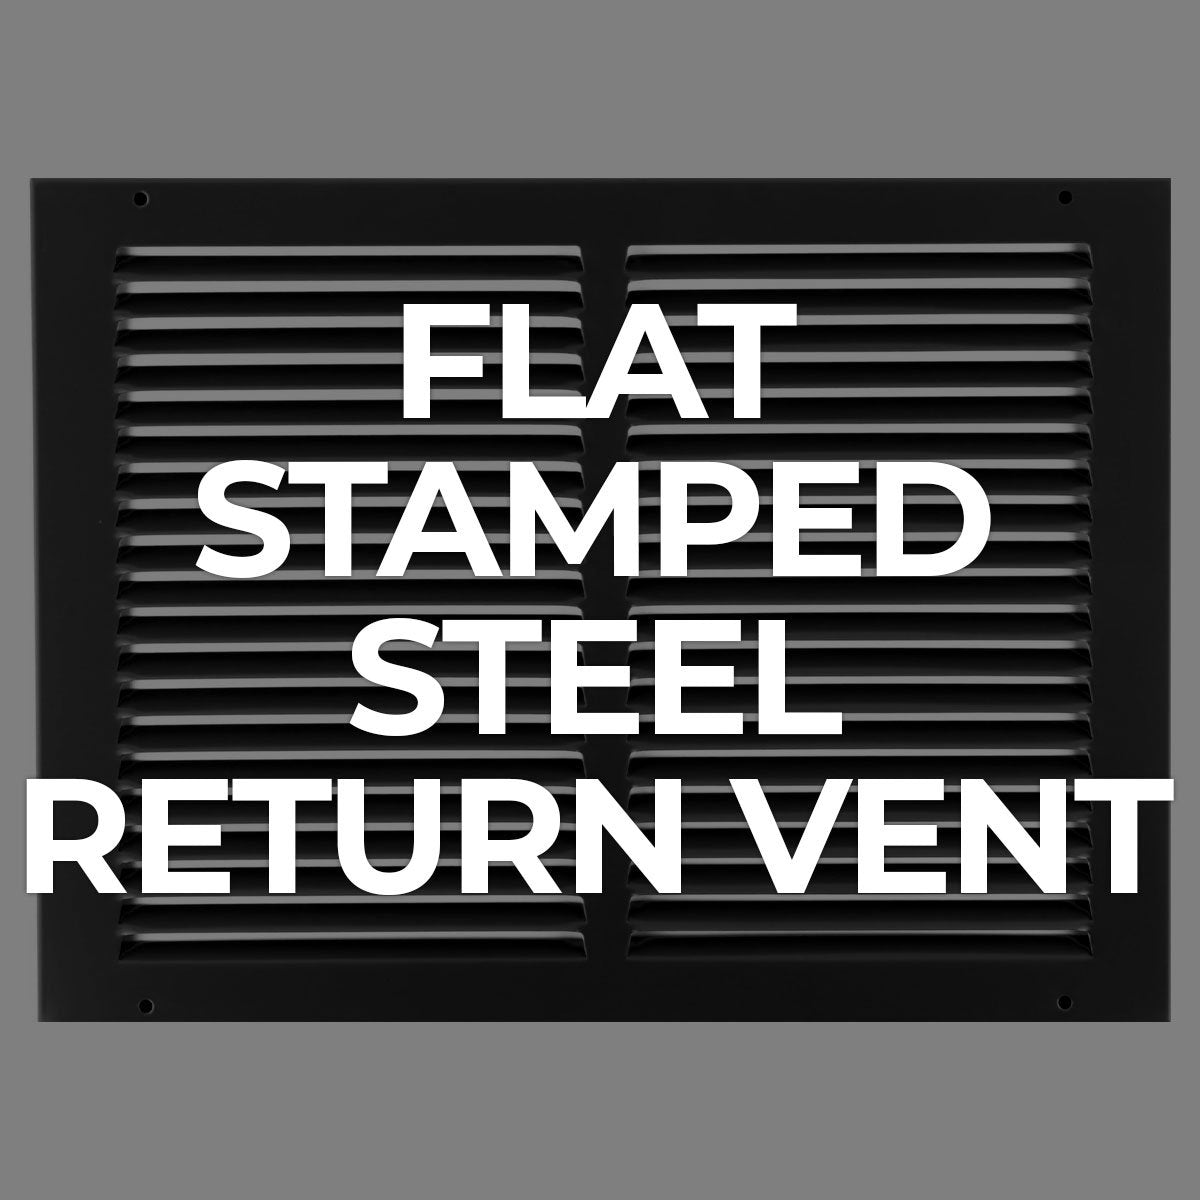 Search by Collections: Flat Stamped Steel Return Vent